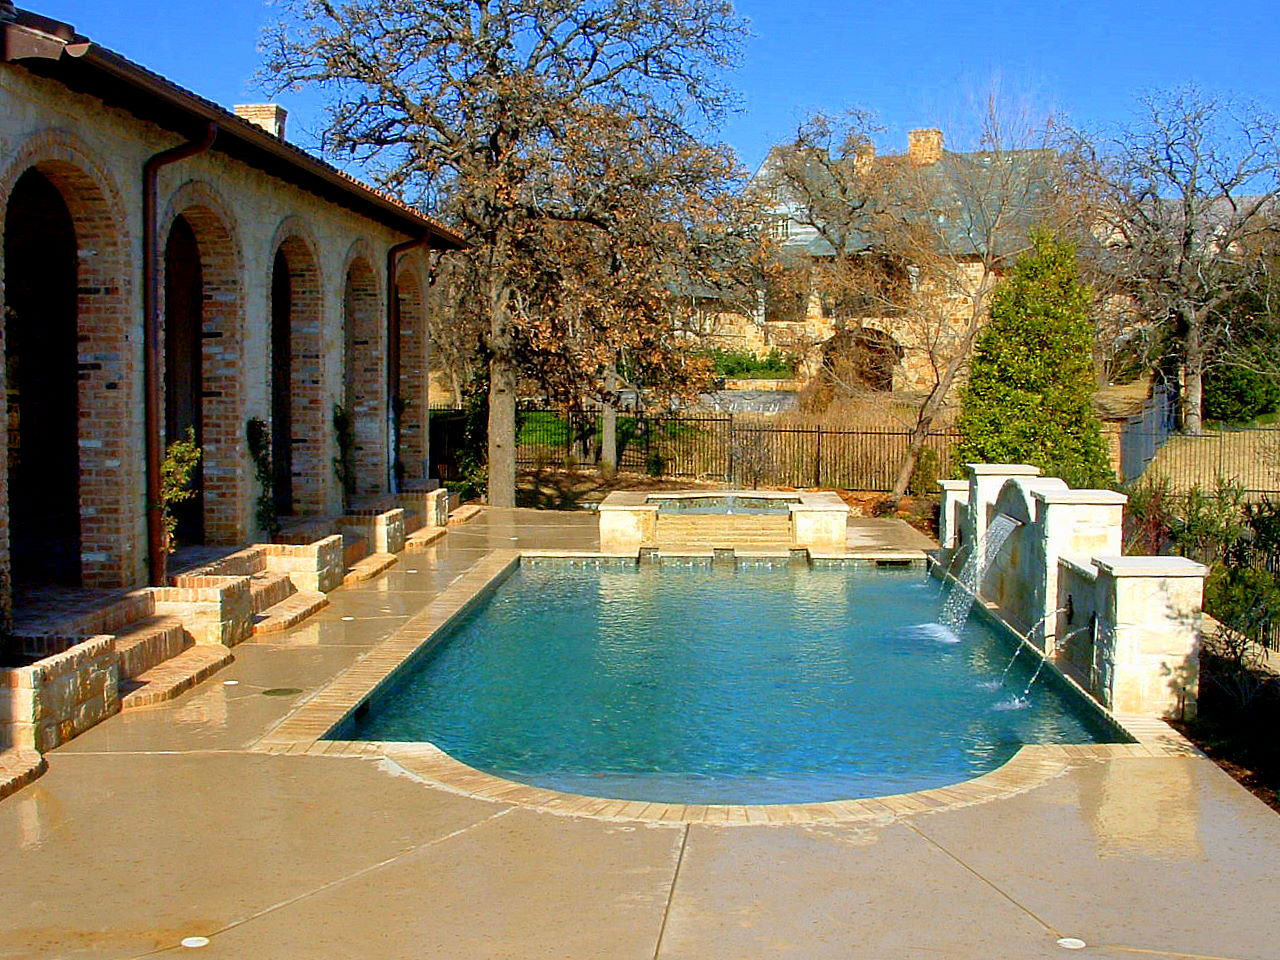 Pool Design Mediterranian Backyard Pool Design Of A Mediterranean House With Beige Marble Floor Near Side Hot Tube And Trees Backyard Appealing Backyard Pool Designs For Contemporary Residences